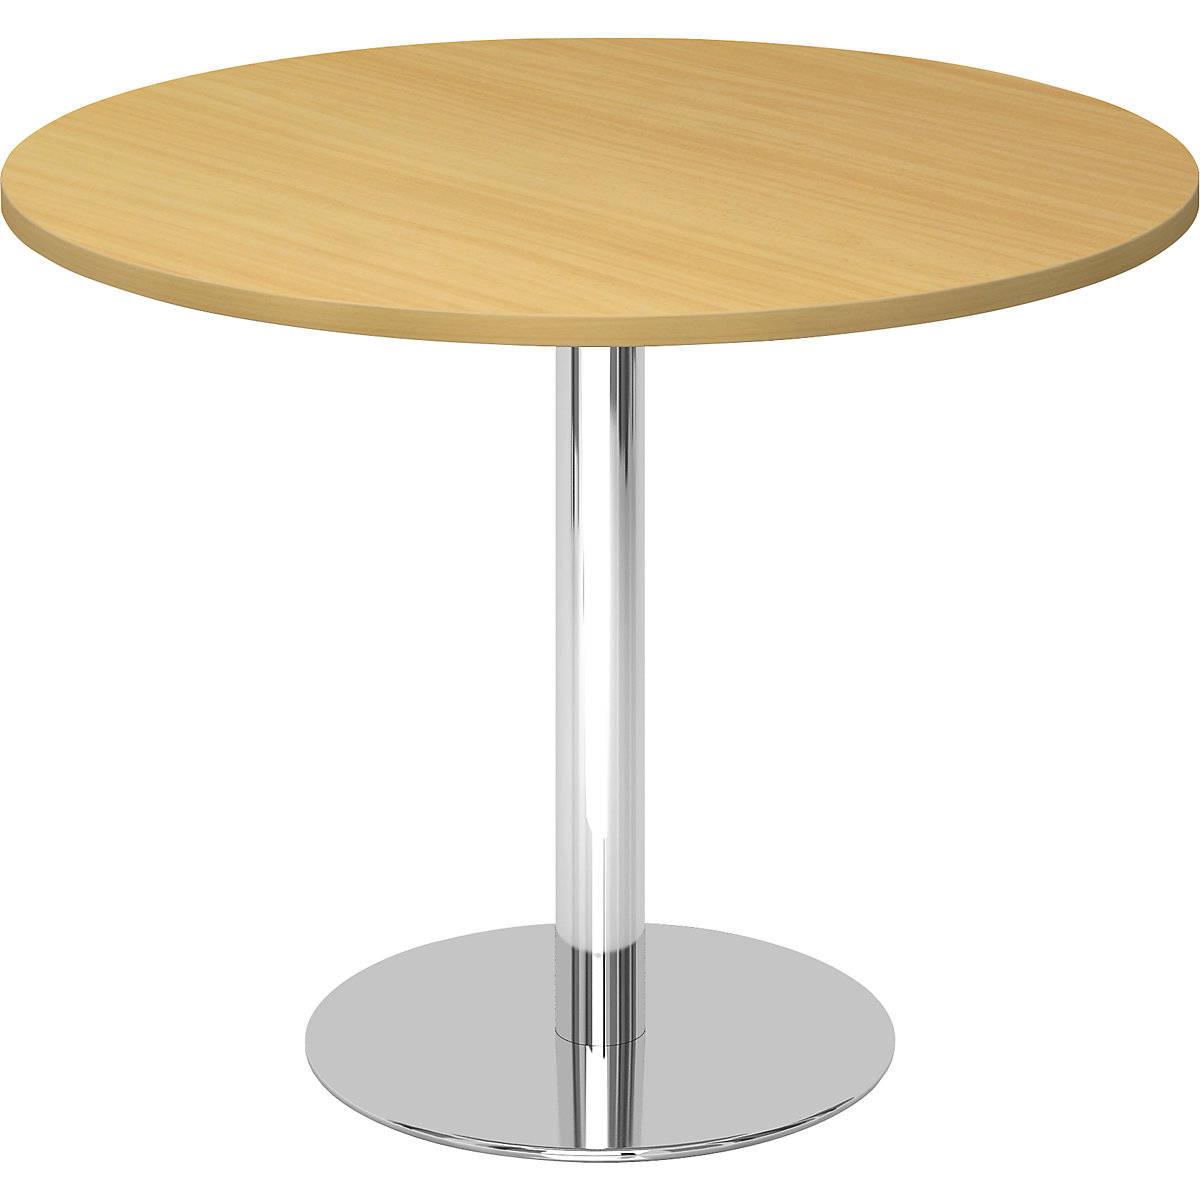 Conference table, Ø 1000 mm, 755 mm high, chrome plated frame, tabletop in beech finish-3